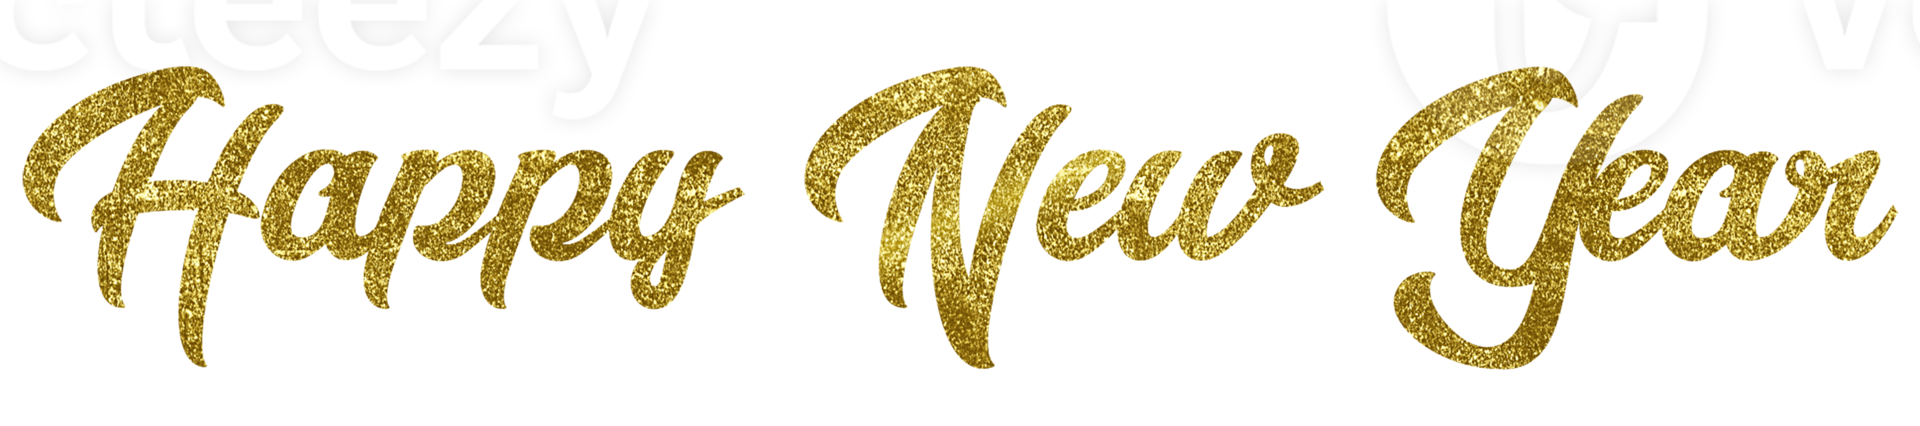 Golden Text Happy New Year cut out png